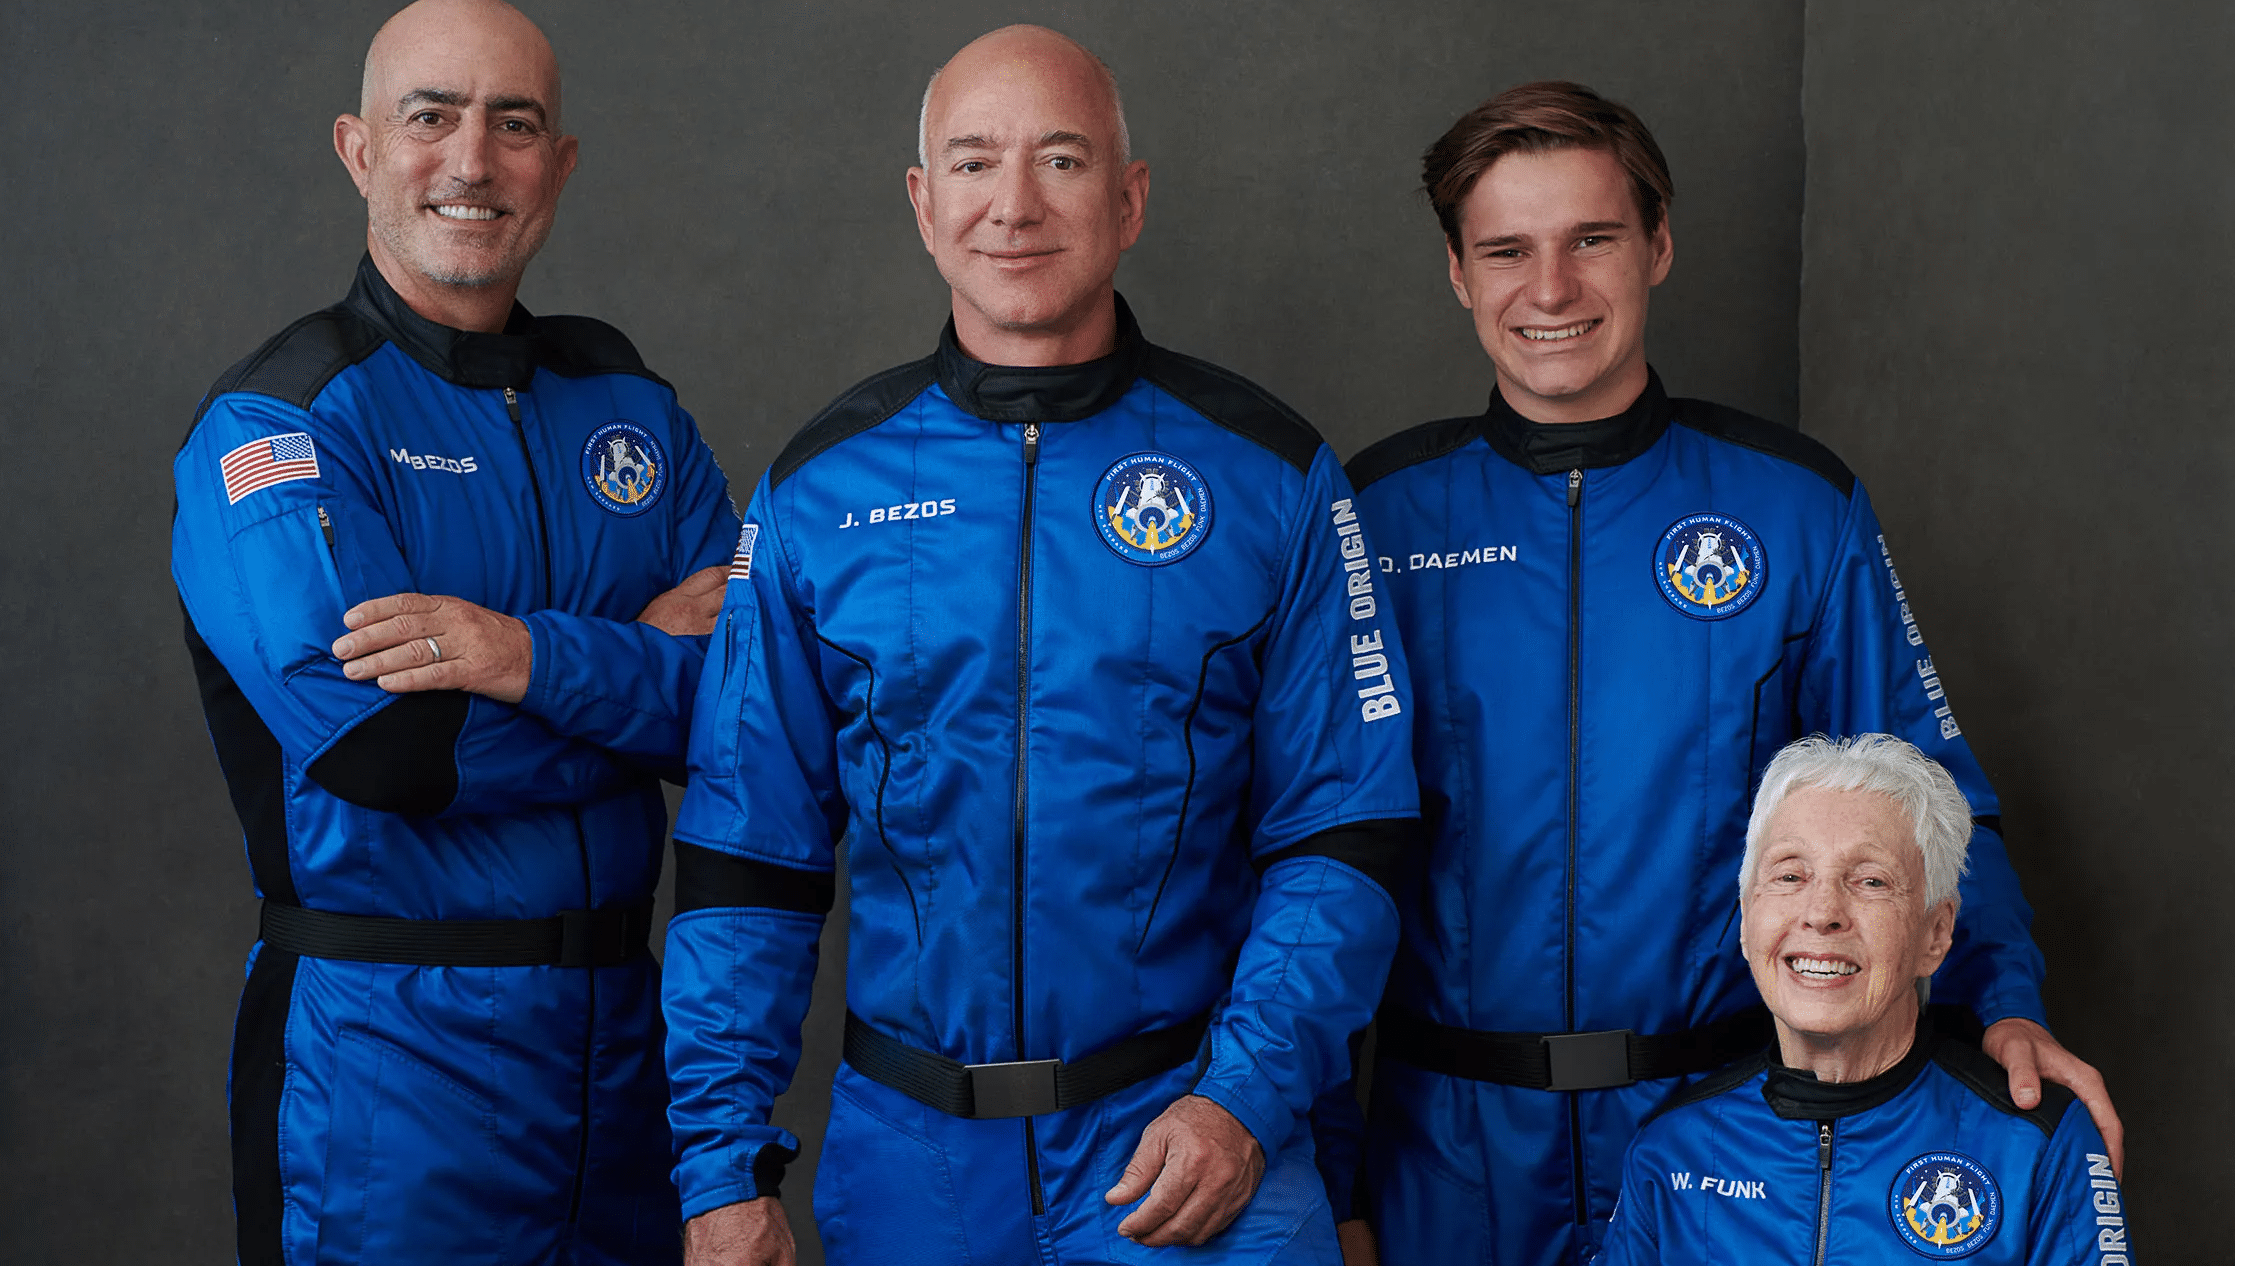 To space and back, with Jeff Bezos: The three chosen passengers